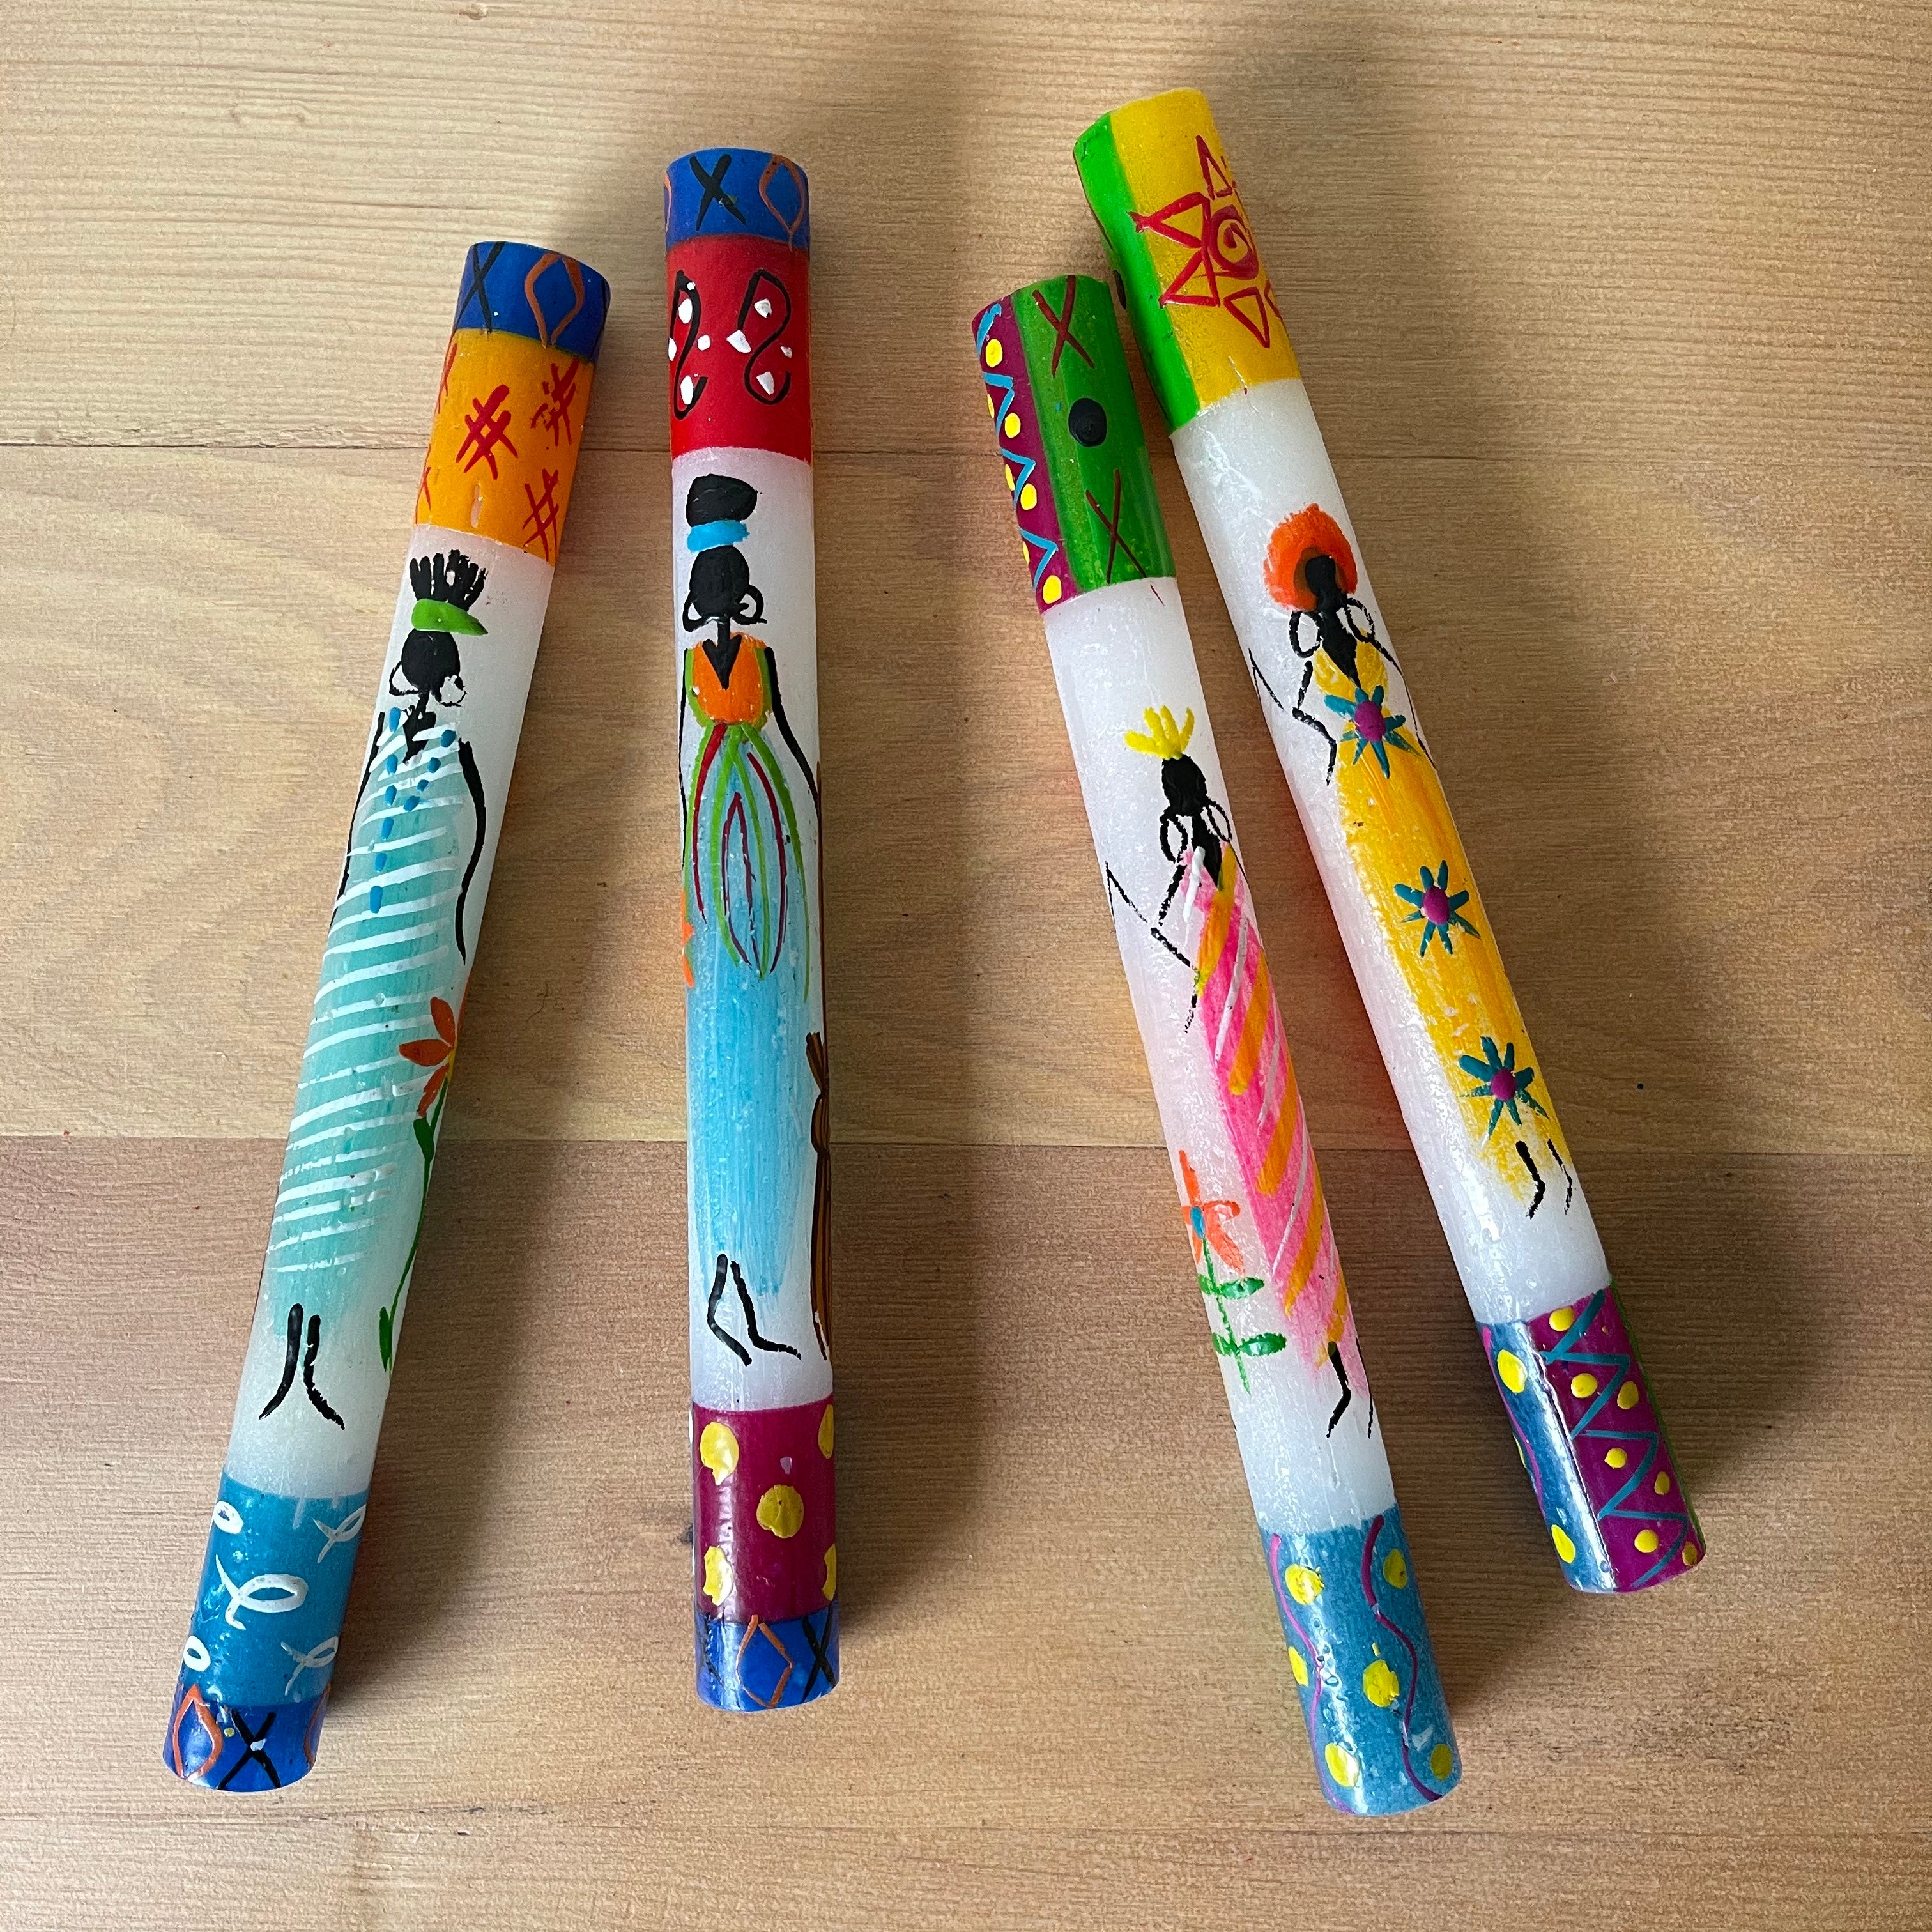 Two pairs of African Ladies tapers.  Colorful design at the top and bottom of each taper, with a whimsy African Lady painted on the side of the candle. Fair Trade.